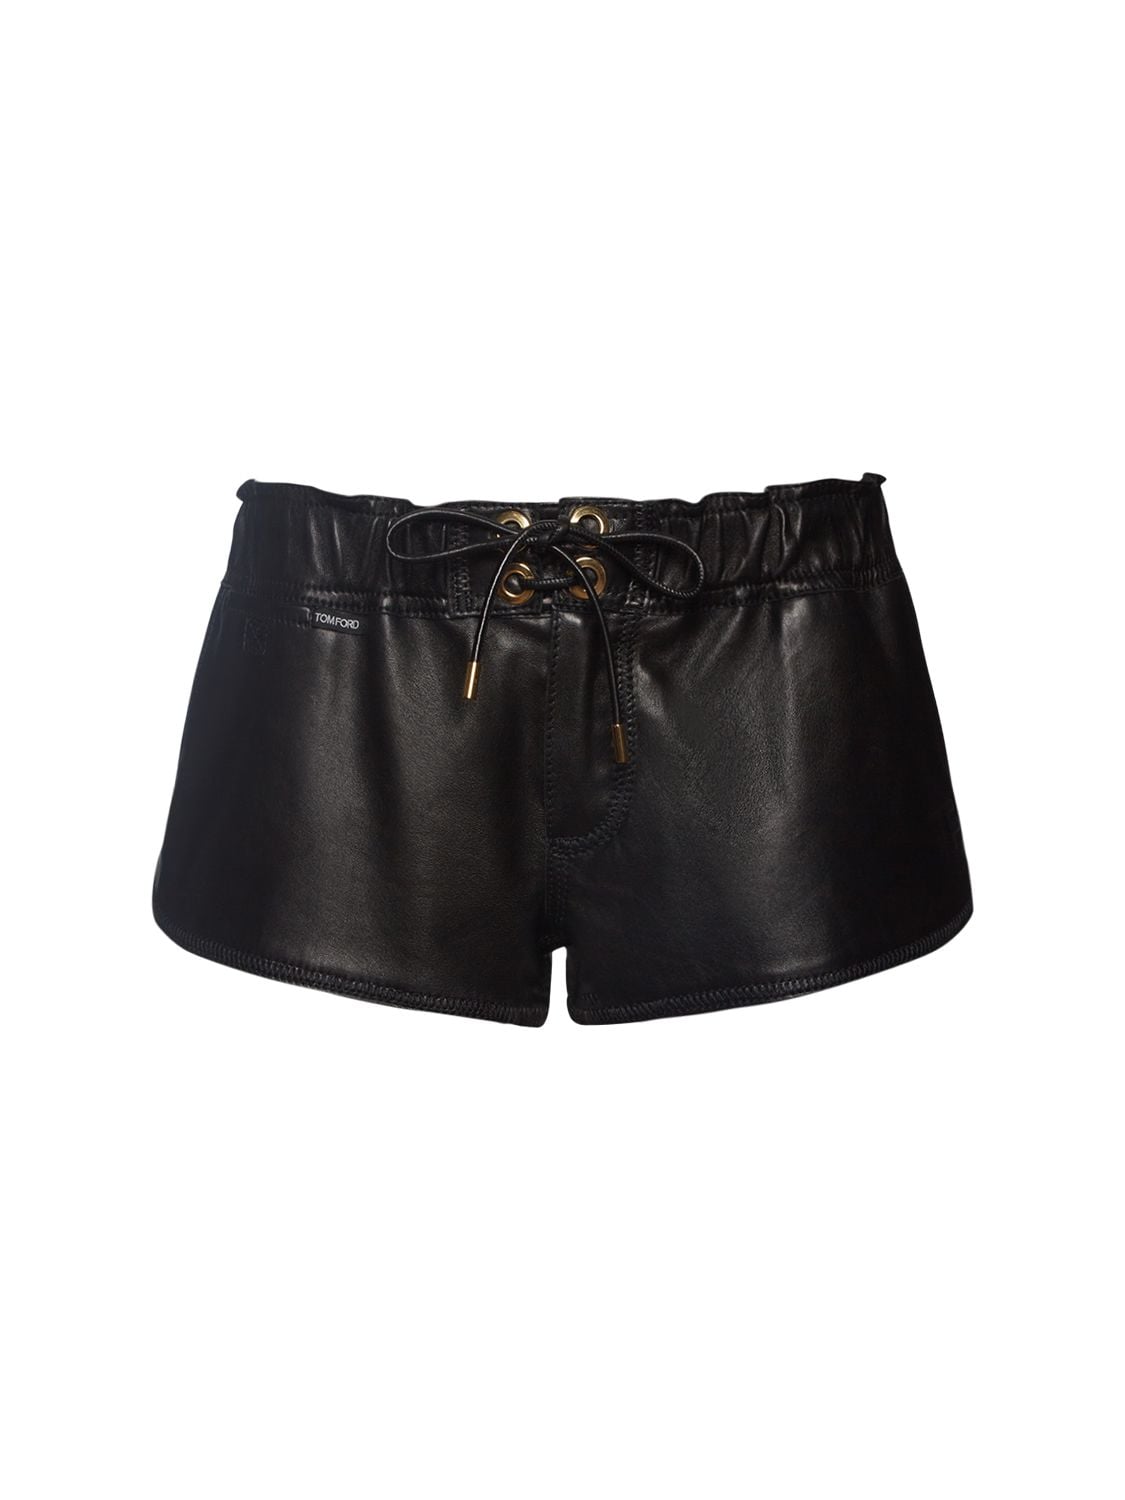 TOM FORD LEATHER LOW WAIST SHORTS